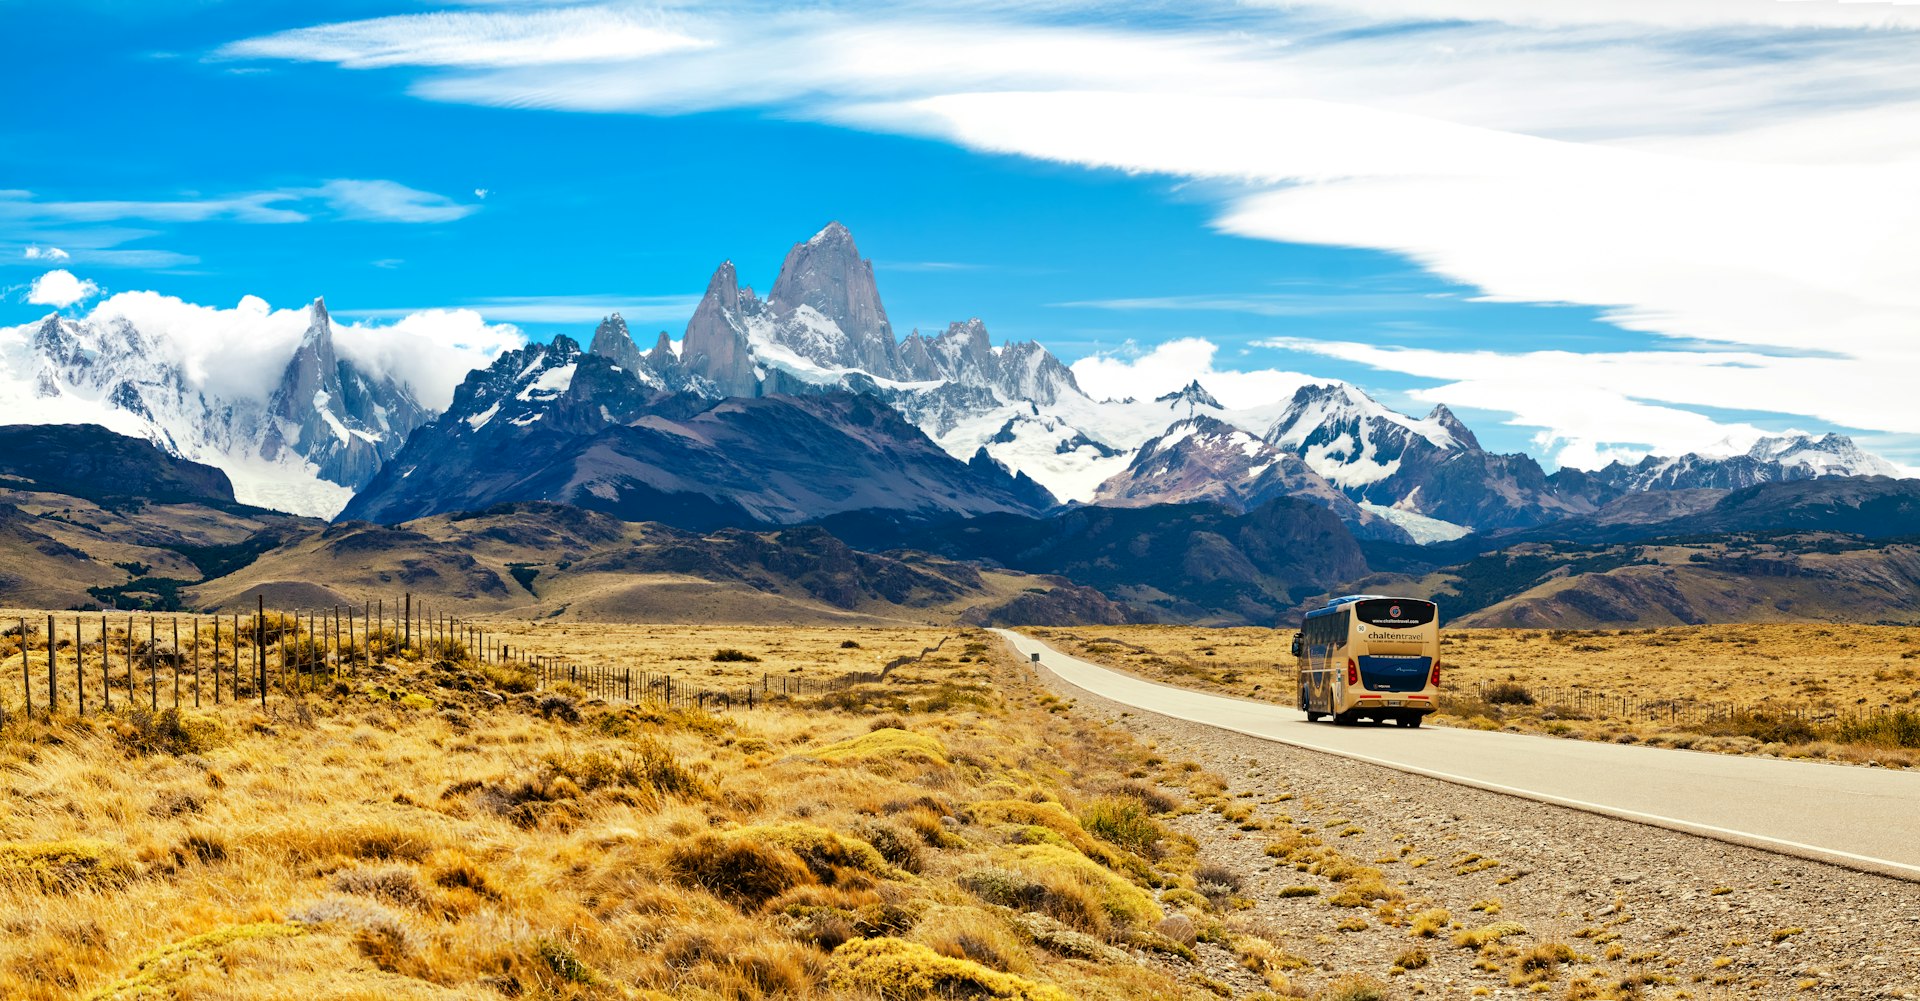 A bus travels on the road to El Chalten, toward the spectacular peaks of Mt Fitzroy and Cerro Torre in the distance